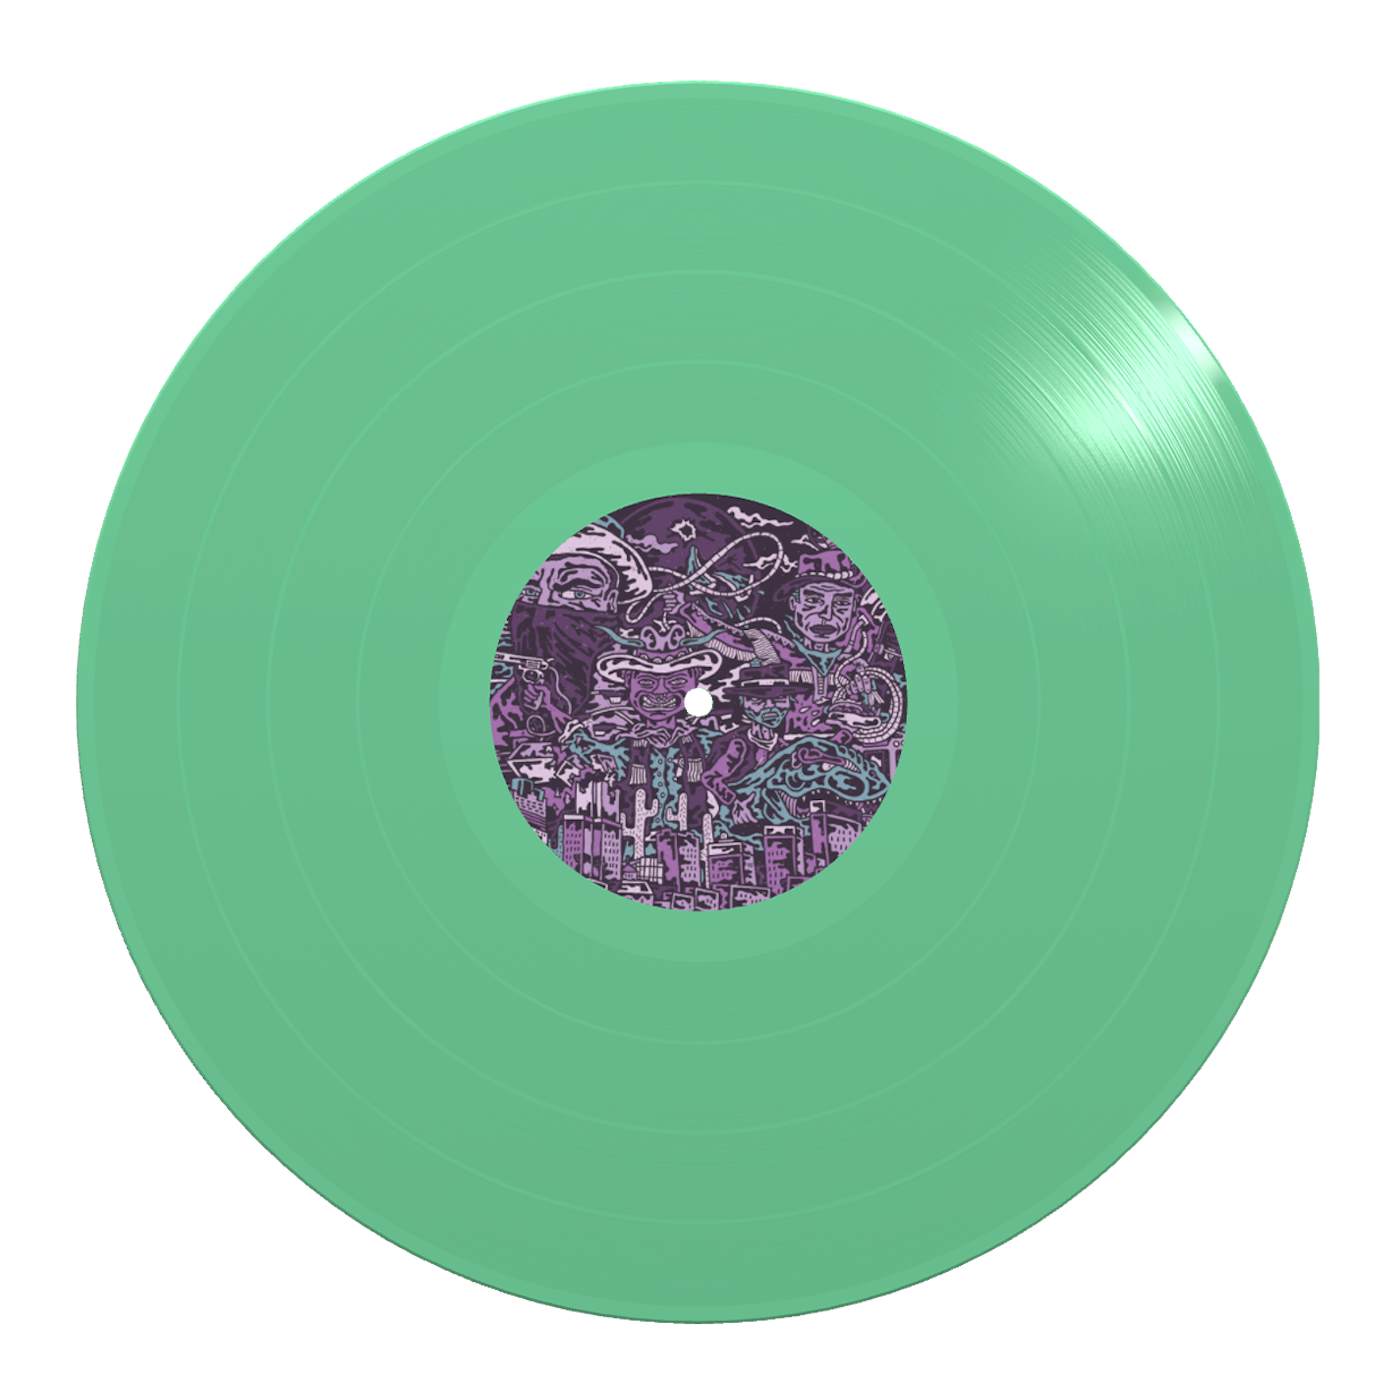 Can Vinyl Records Also Be Green?